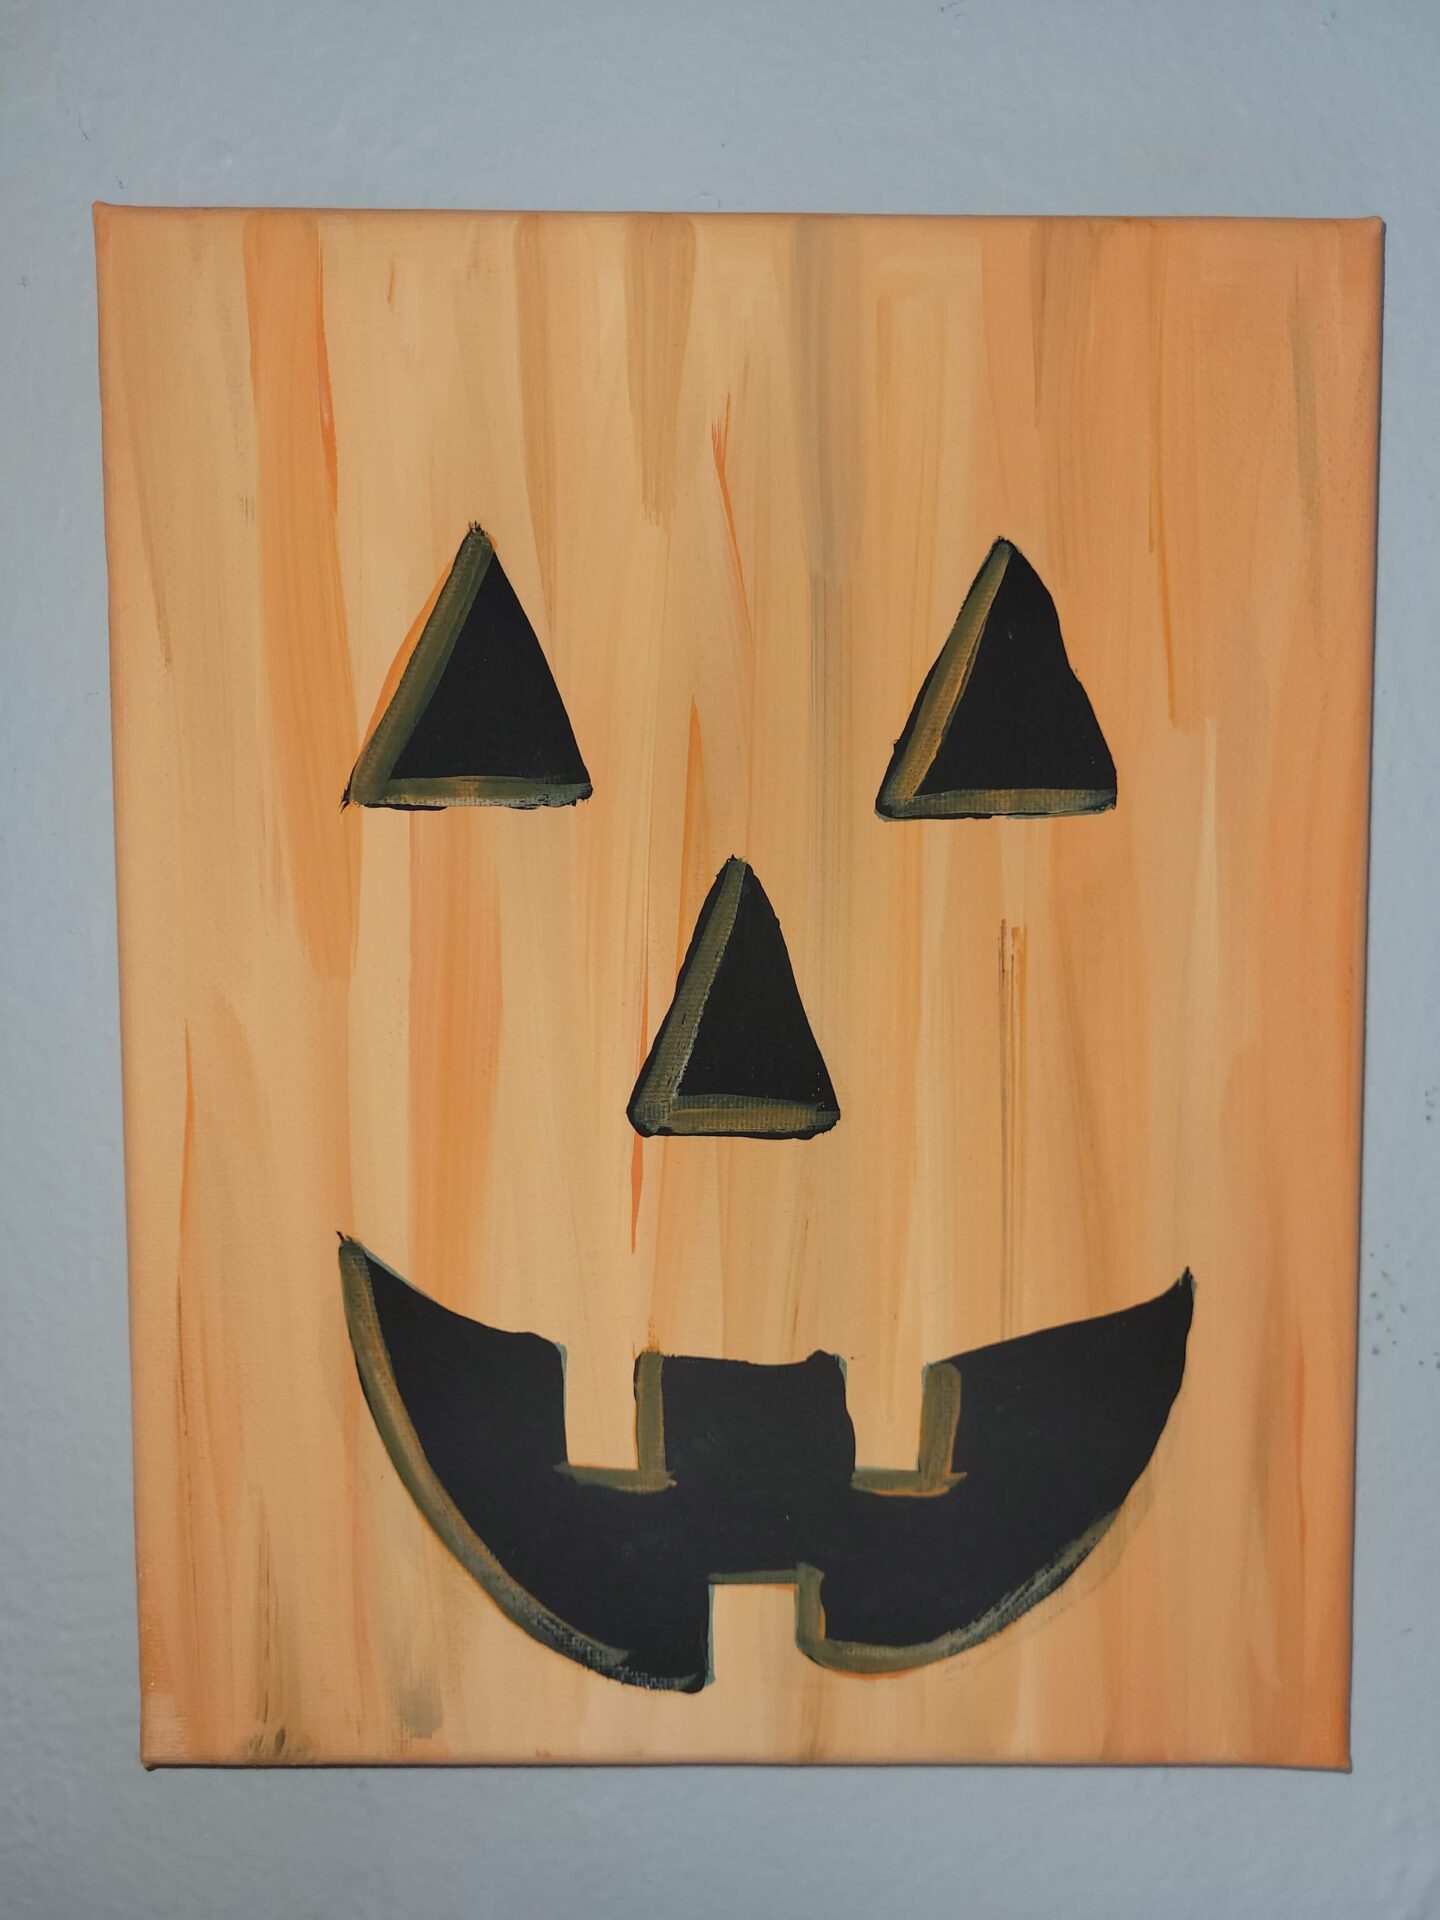 A Halloween Themed Carving Close Up Painting